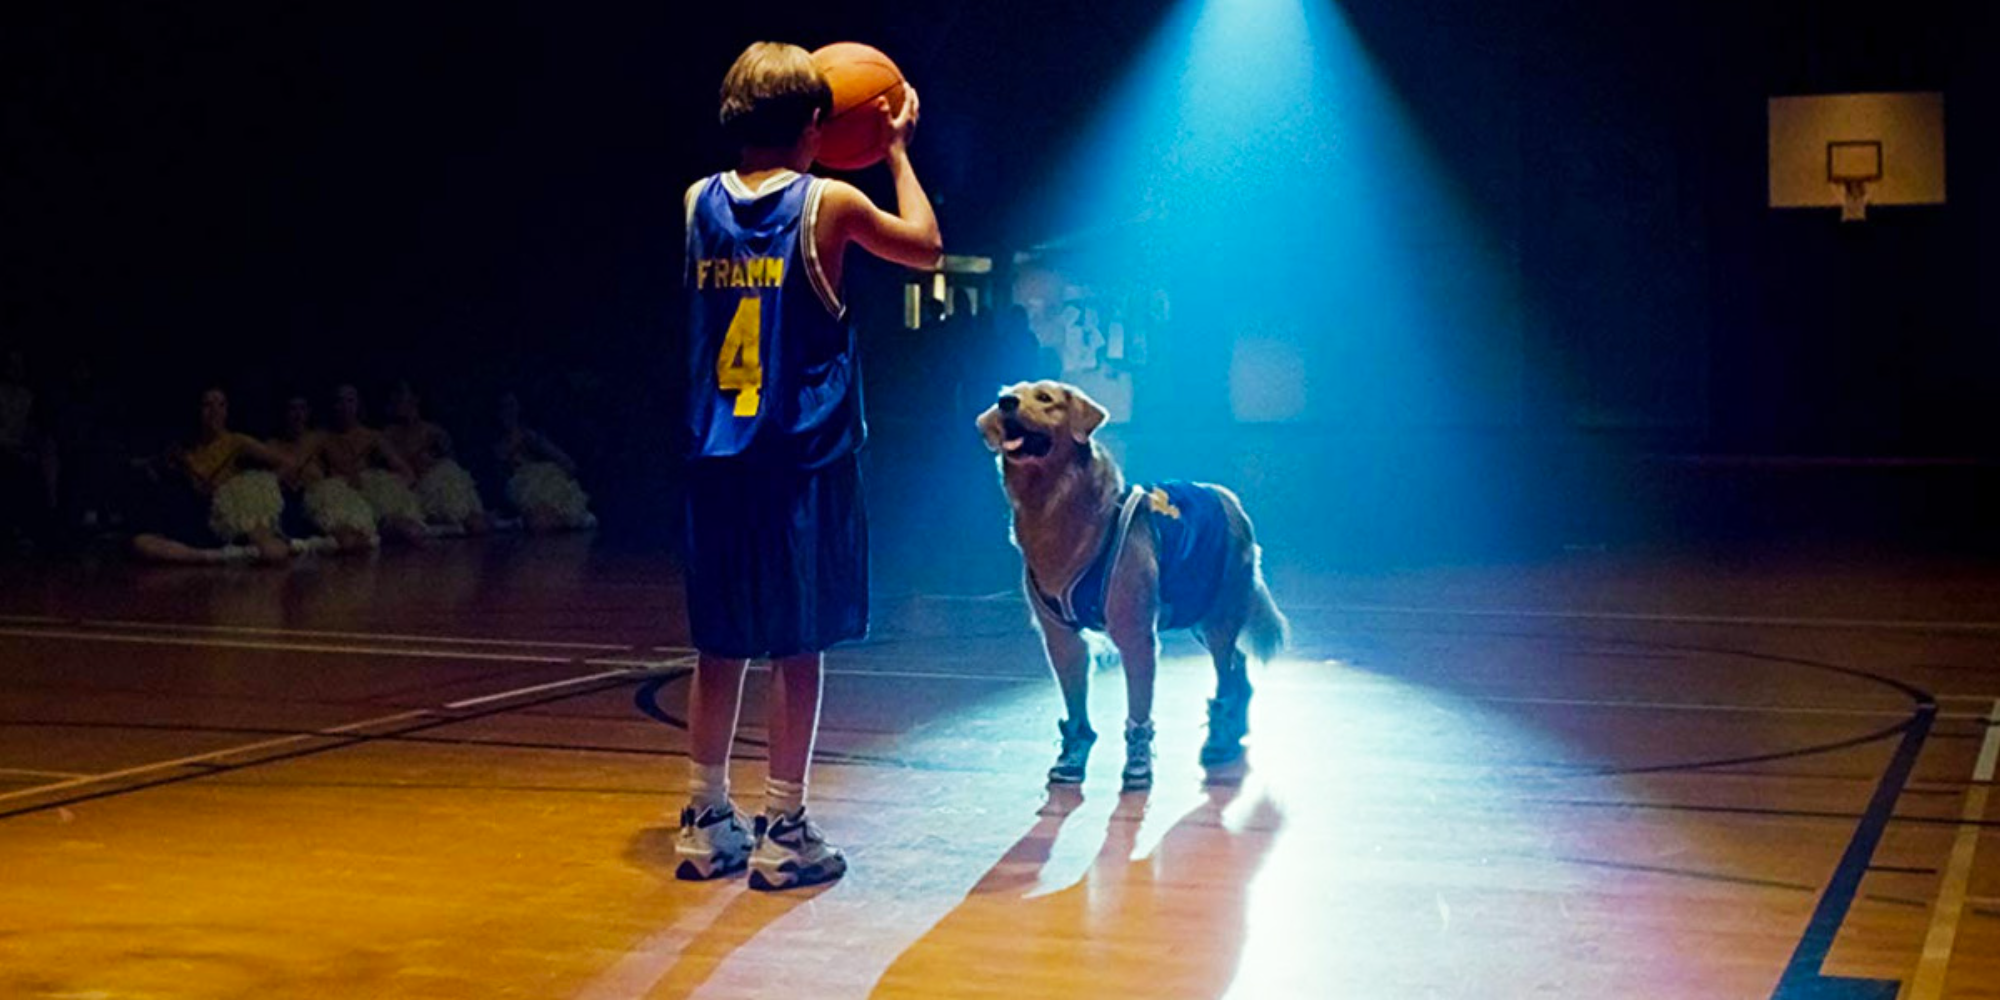 airbud Josh and Buddy take the court at halftime 